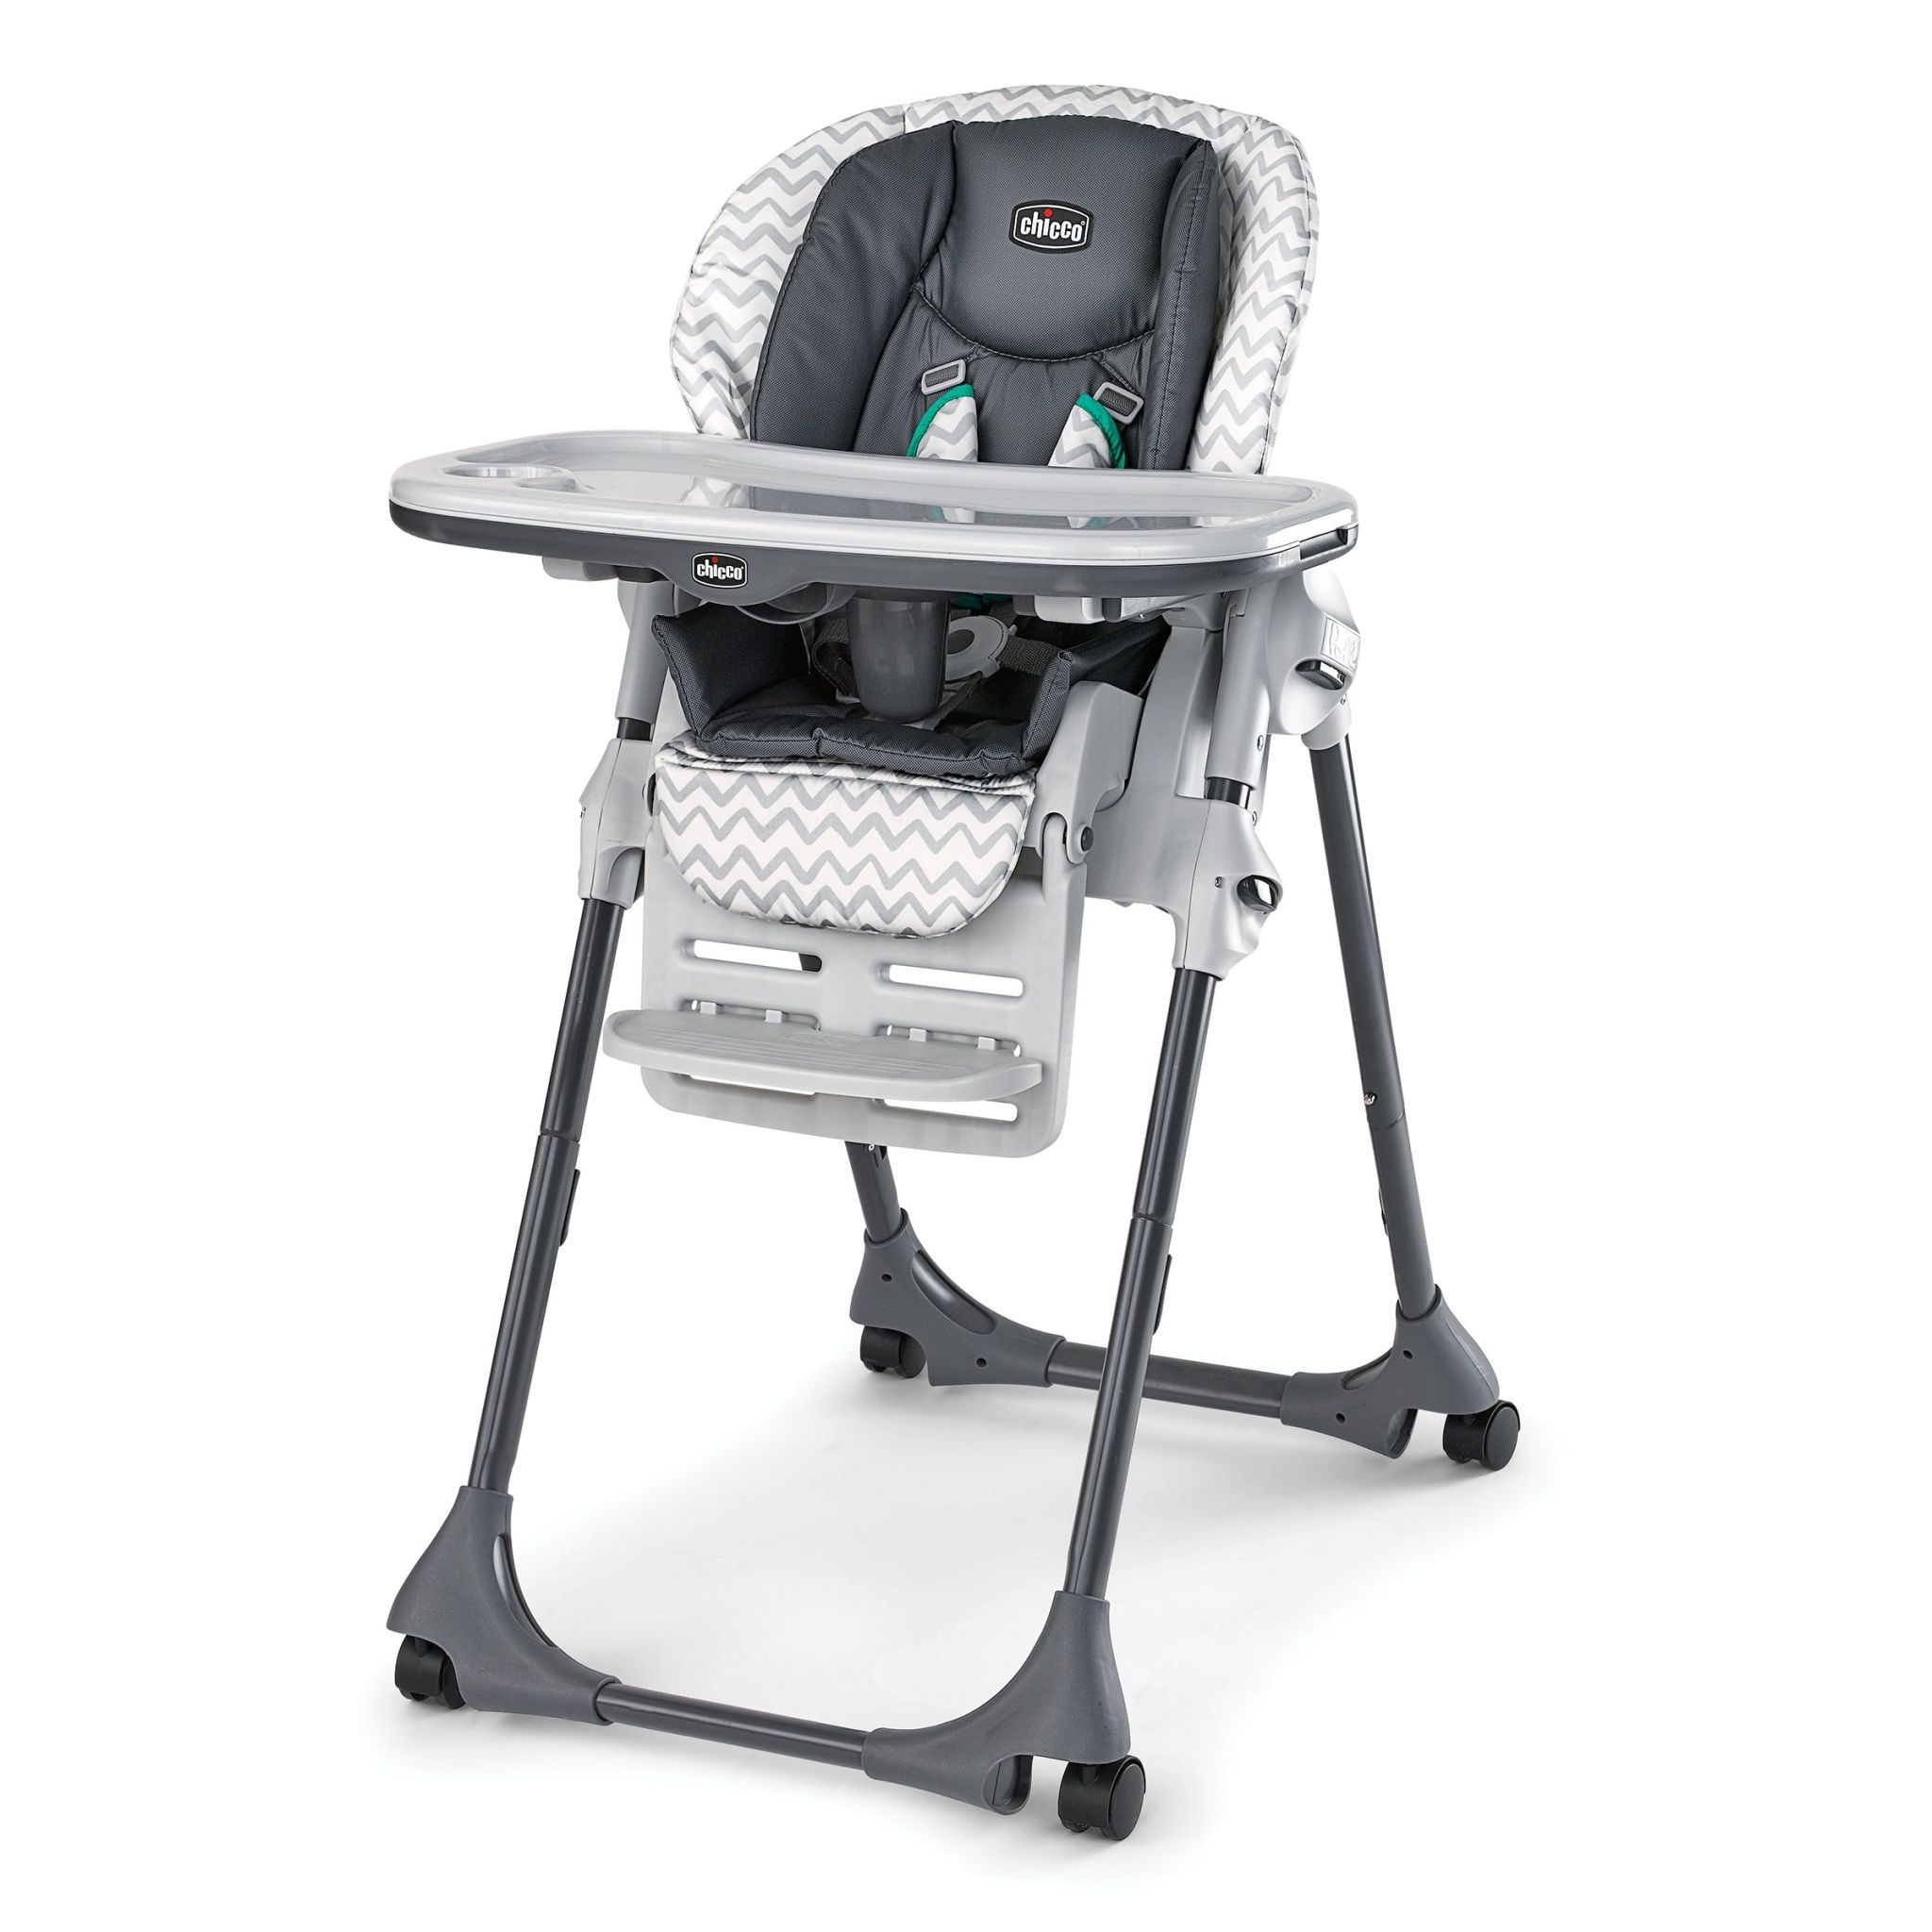 Folding High Chair Chicco Chicco Portable Highchair Grey Booster Seat 